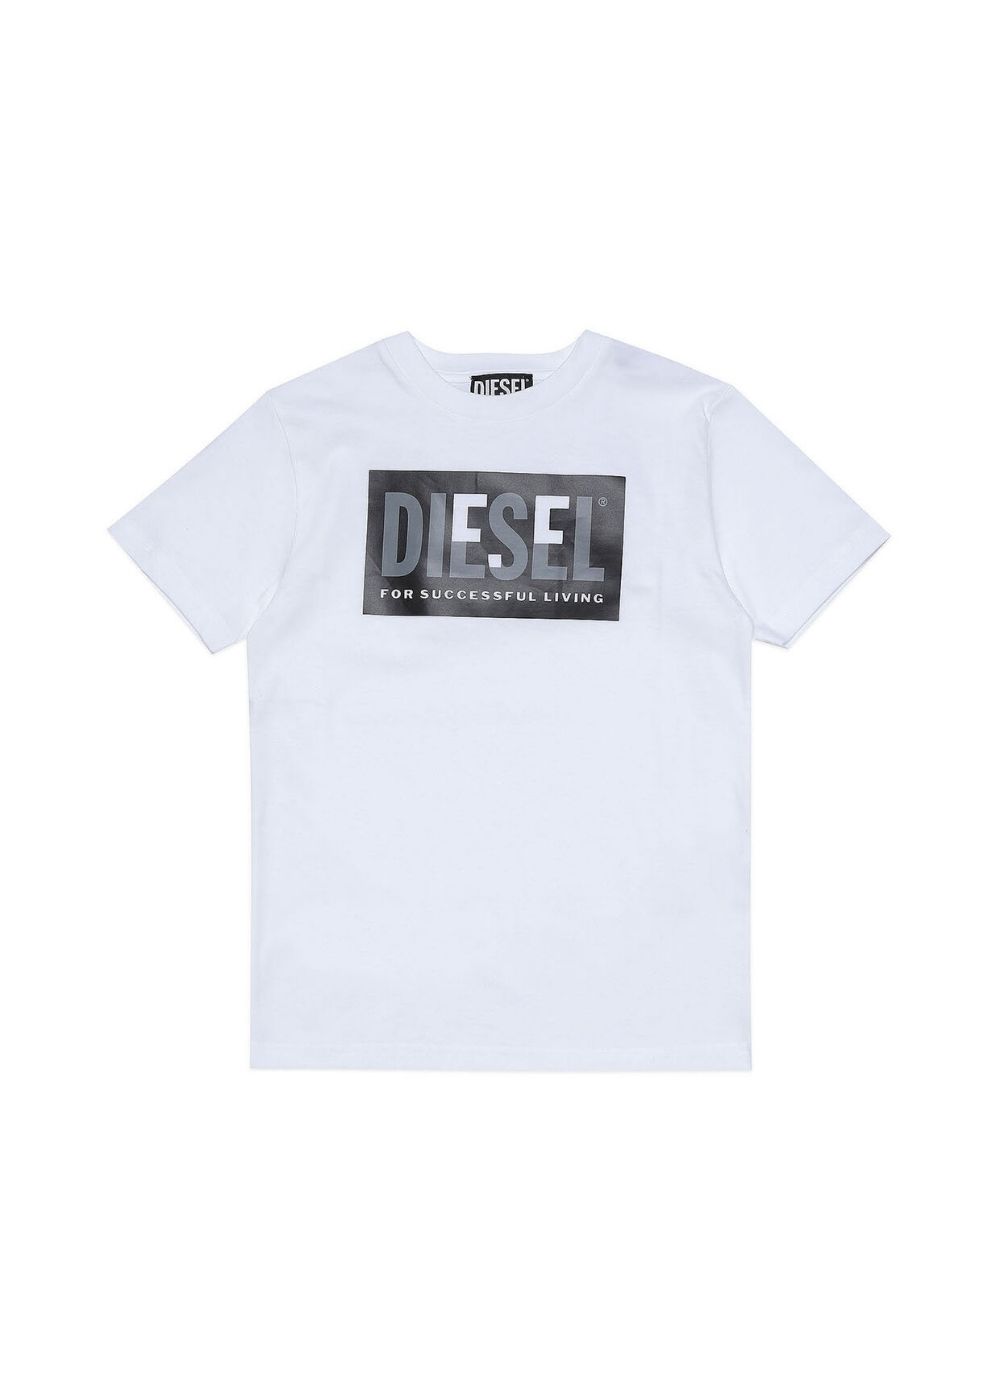 Featured image for “Diesel T-shirt logo”